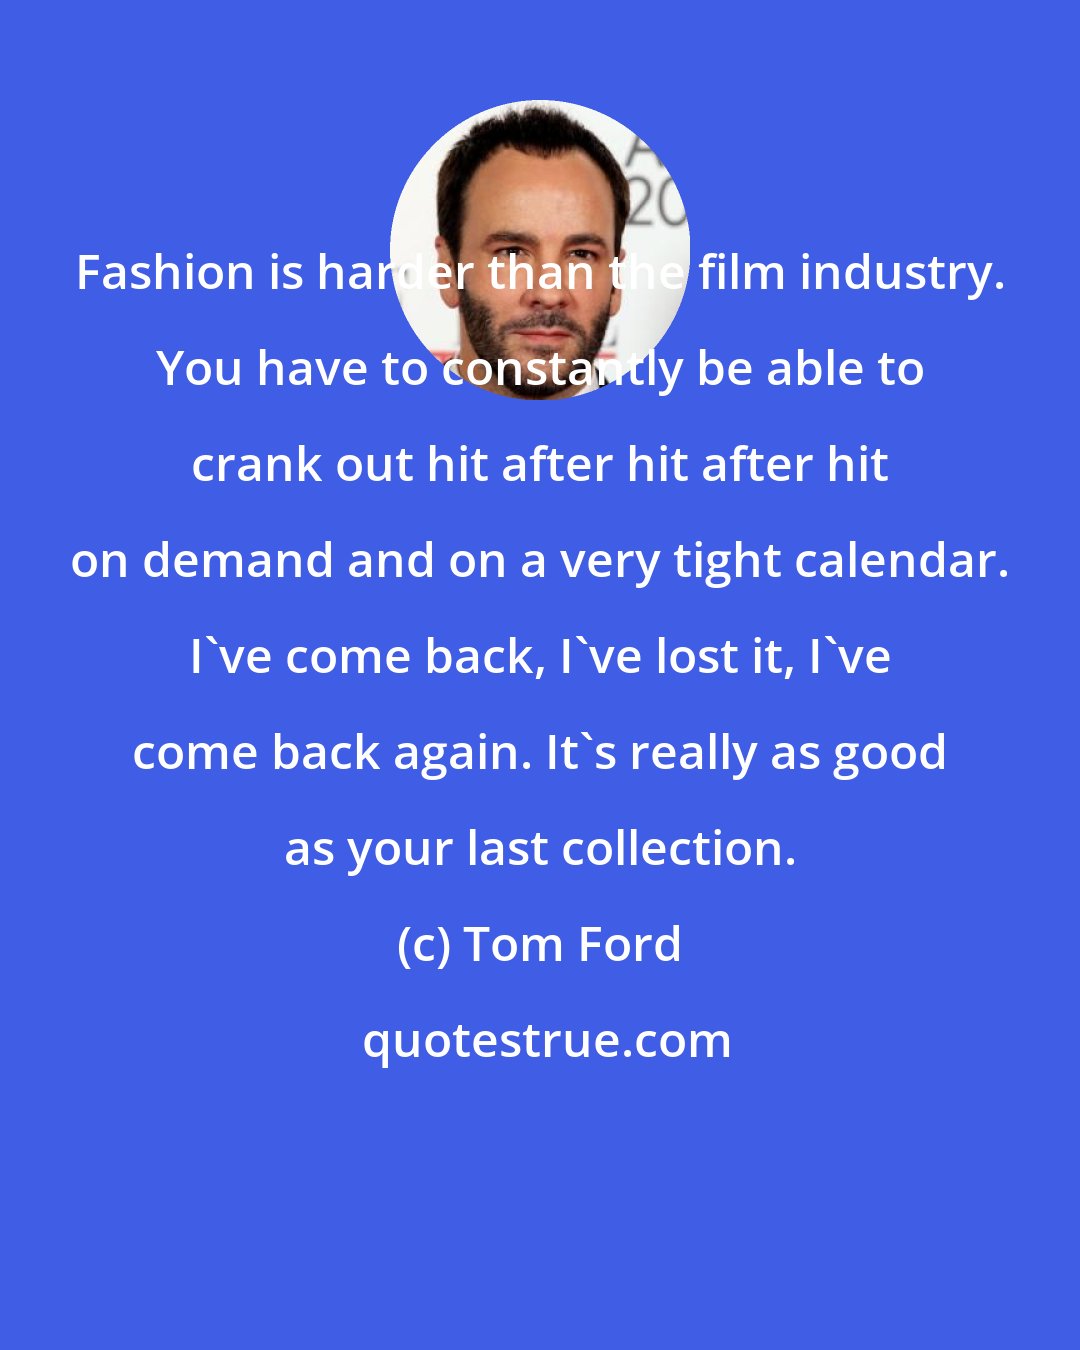 Tom Ford: Fashion is harder than the film industry. You have to constantly be able to crank out hit after hit after hit on demand and on a very tight calendar. I've come back, I've lost it, I've come back again. It's really as good as your last collection.